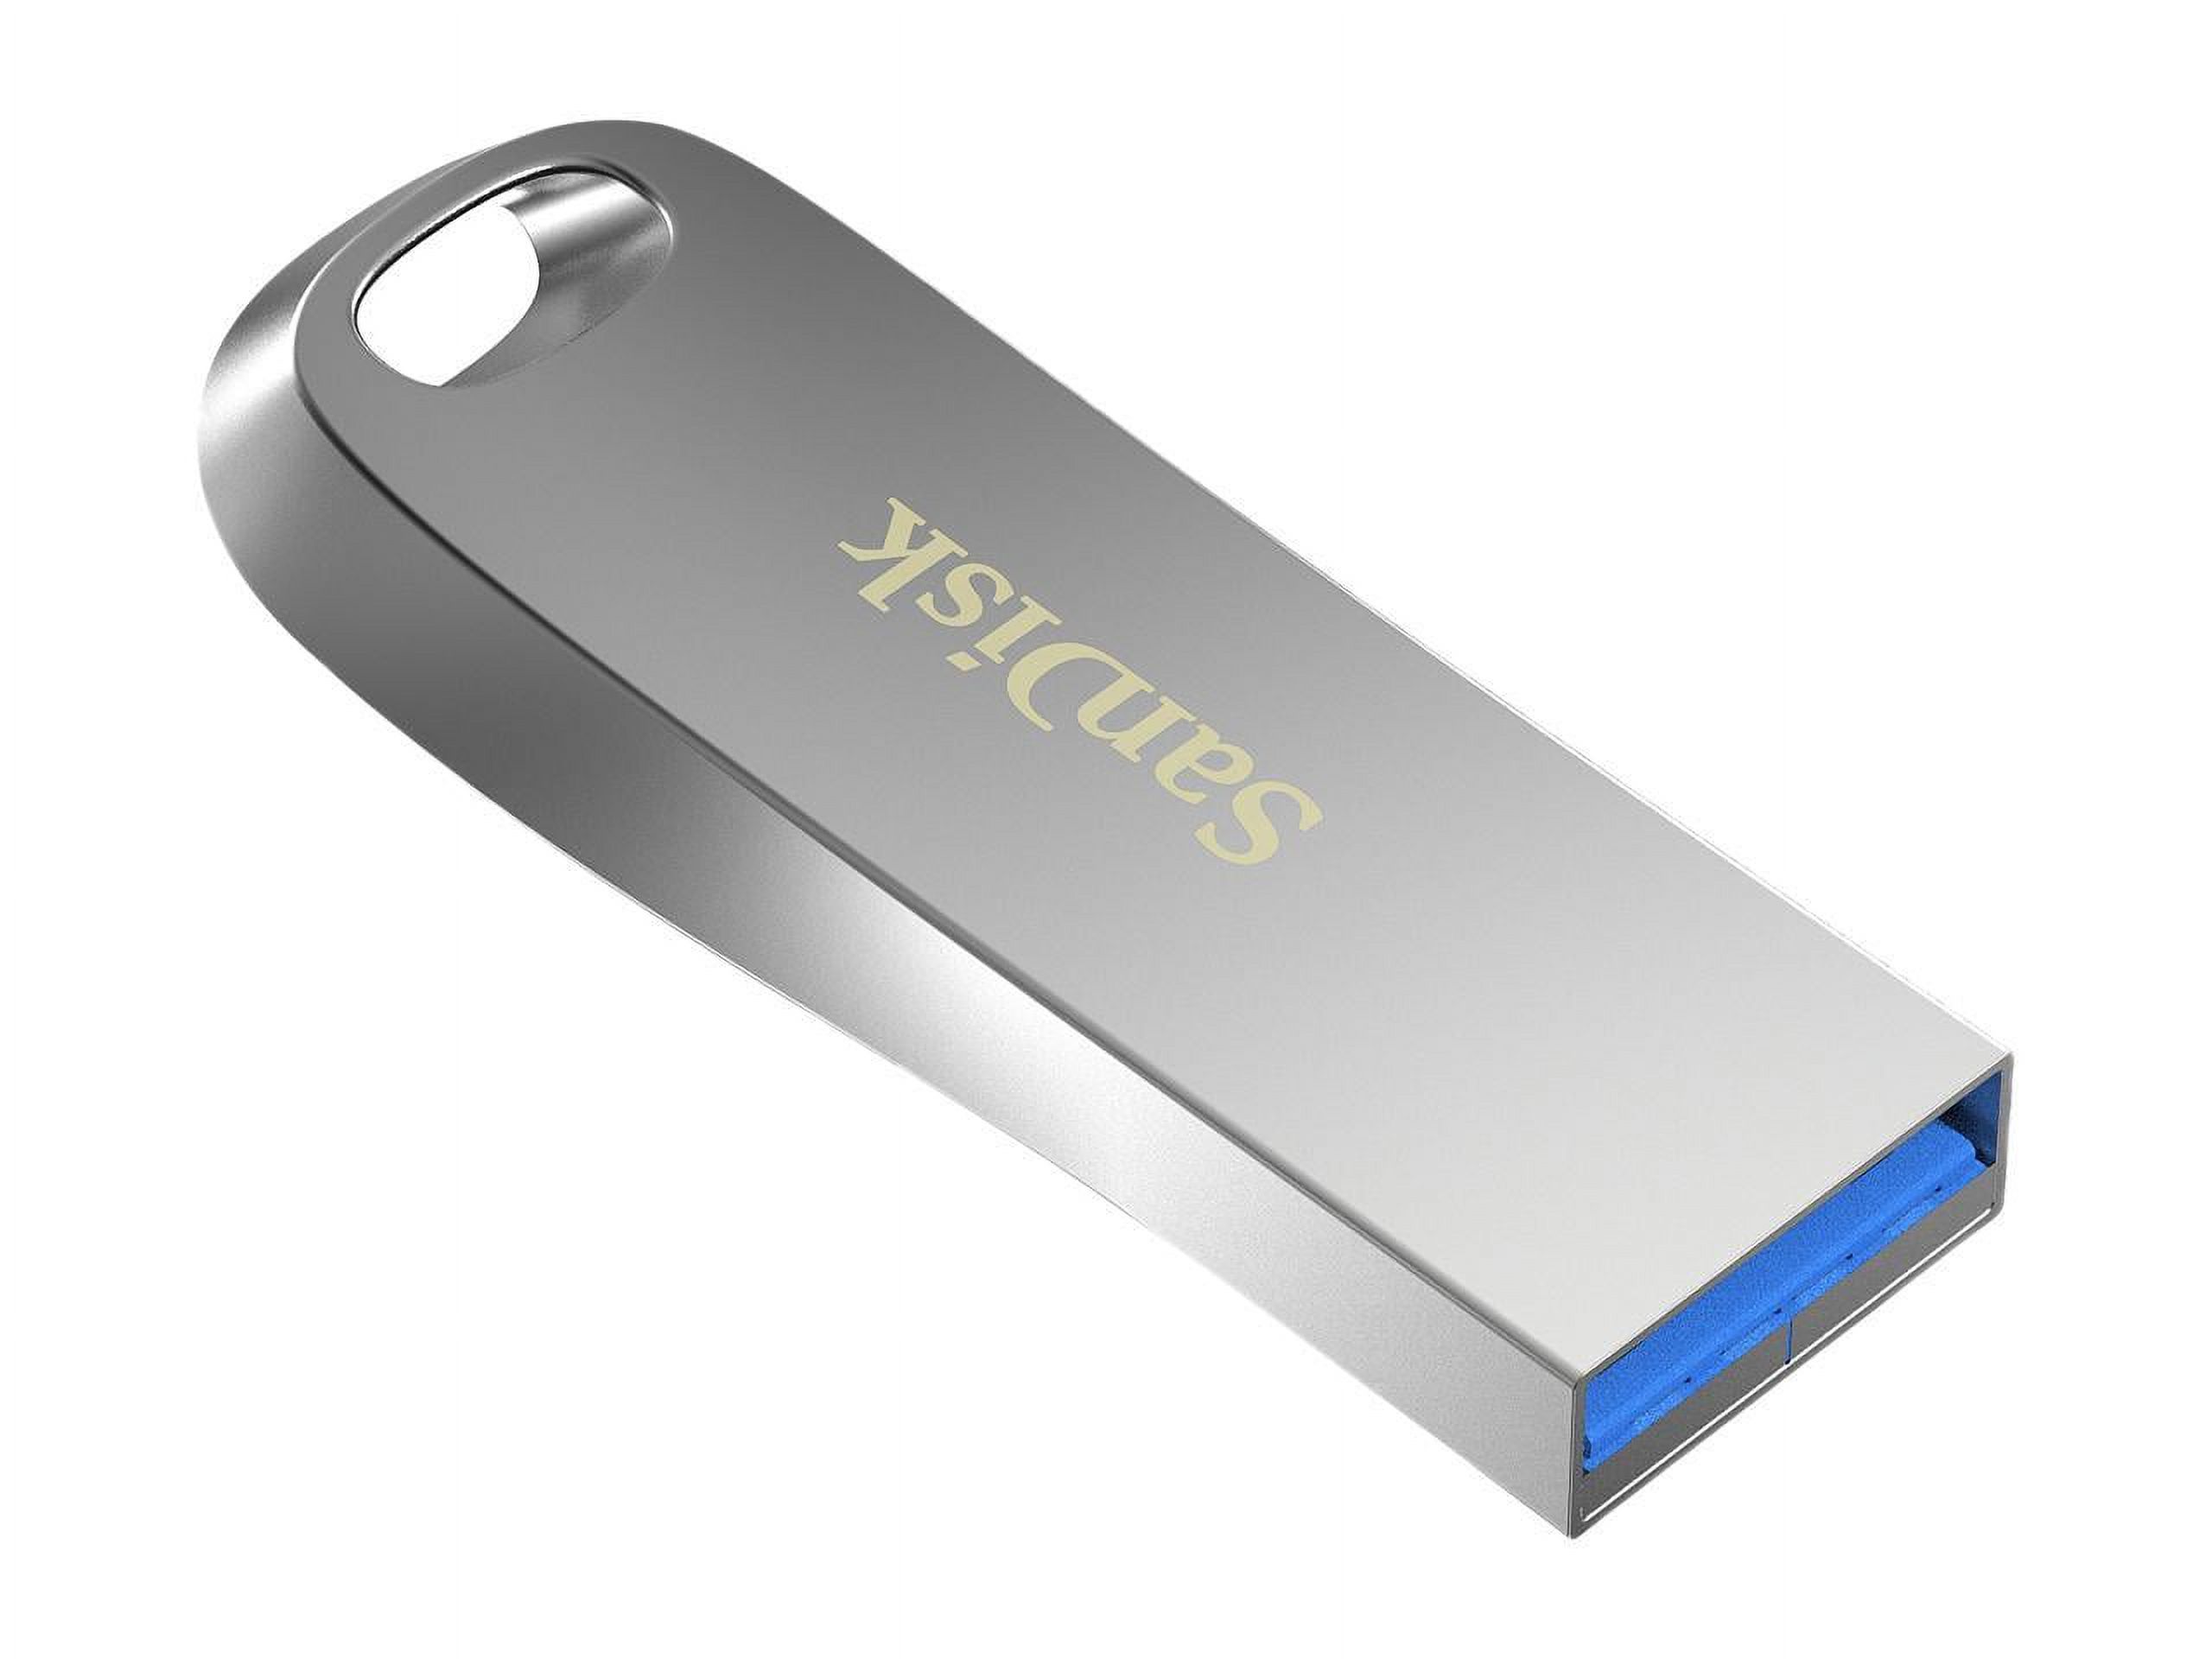 SanDisk 128GB Ultra Luxe USB 3.1 Flash Drive, Speed Up to 150MB/s (SDCZ74-128G-G46) - image 4 of 5